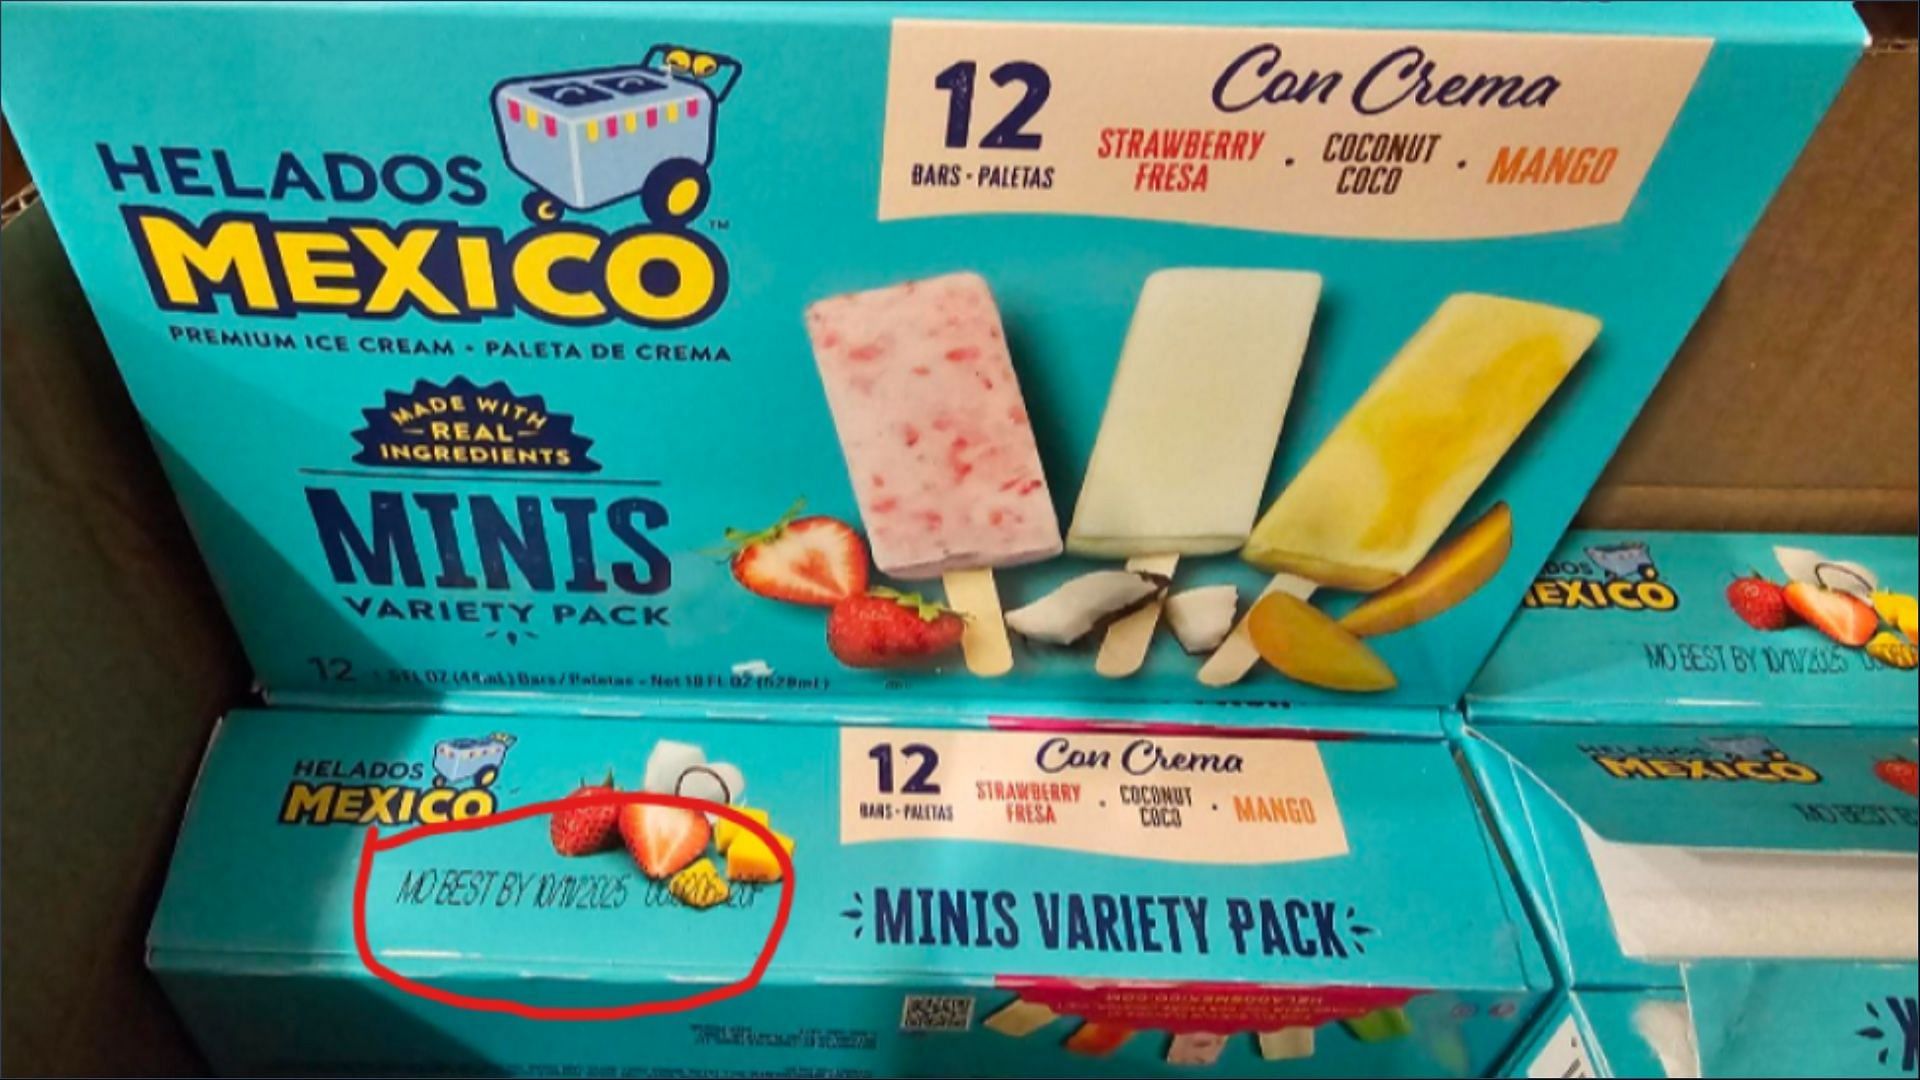 The Helados Mexico Mini Cream Variety Packs were found to be potentially contaminated with Salmonella bacteria (Image via FDA)